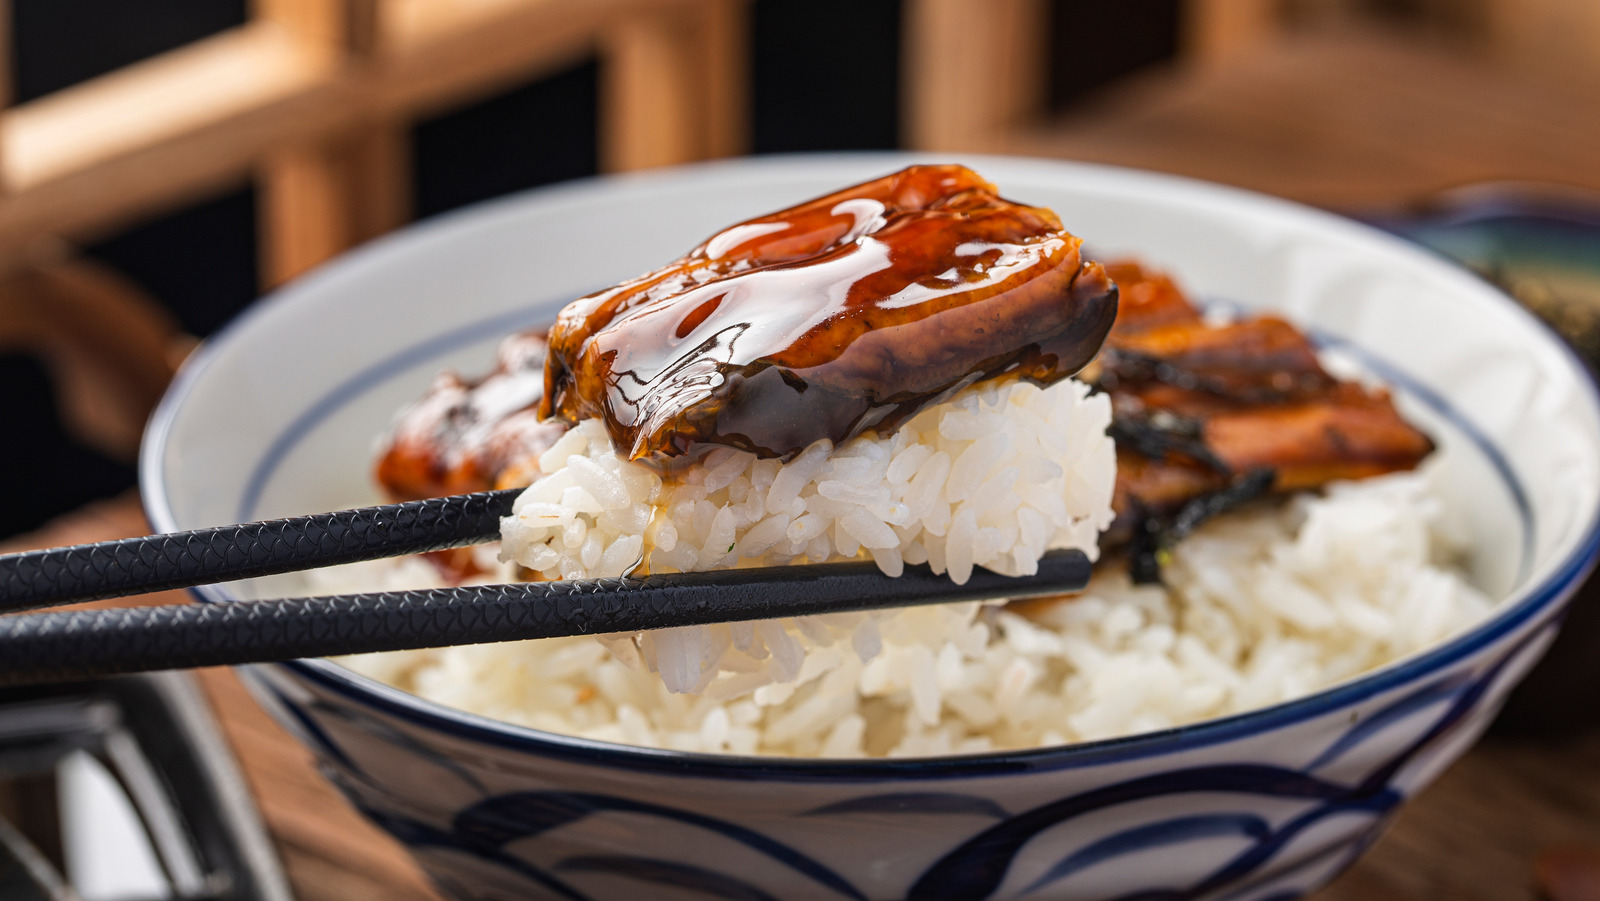 Eel Sauce Is The Umami-Rich Condiment You Should Know About